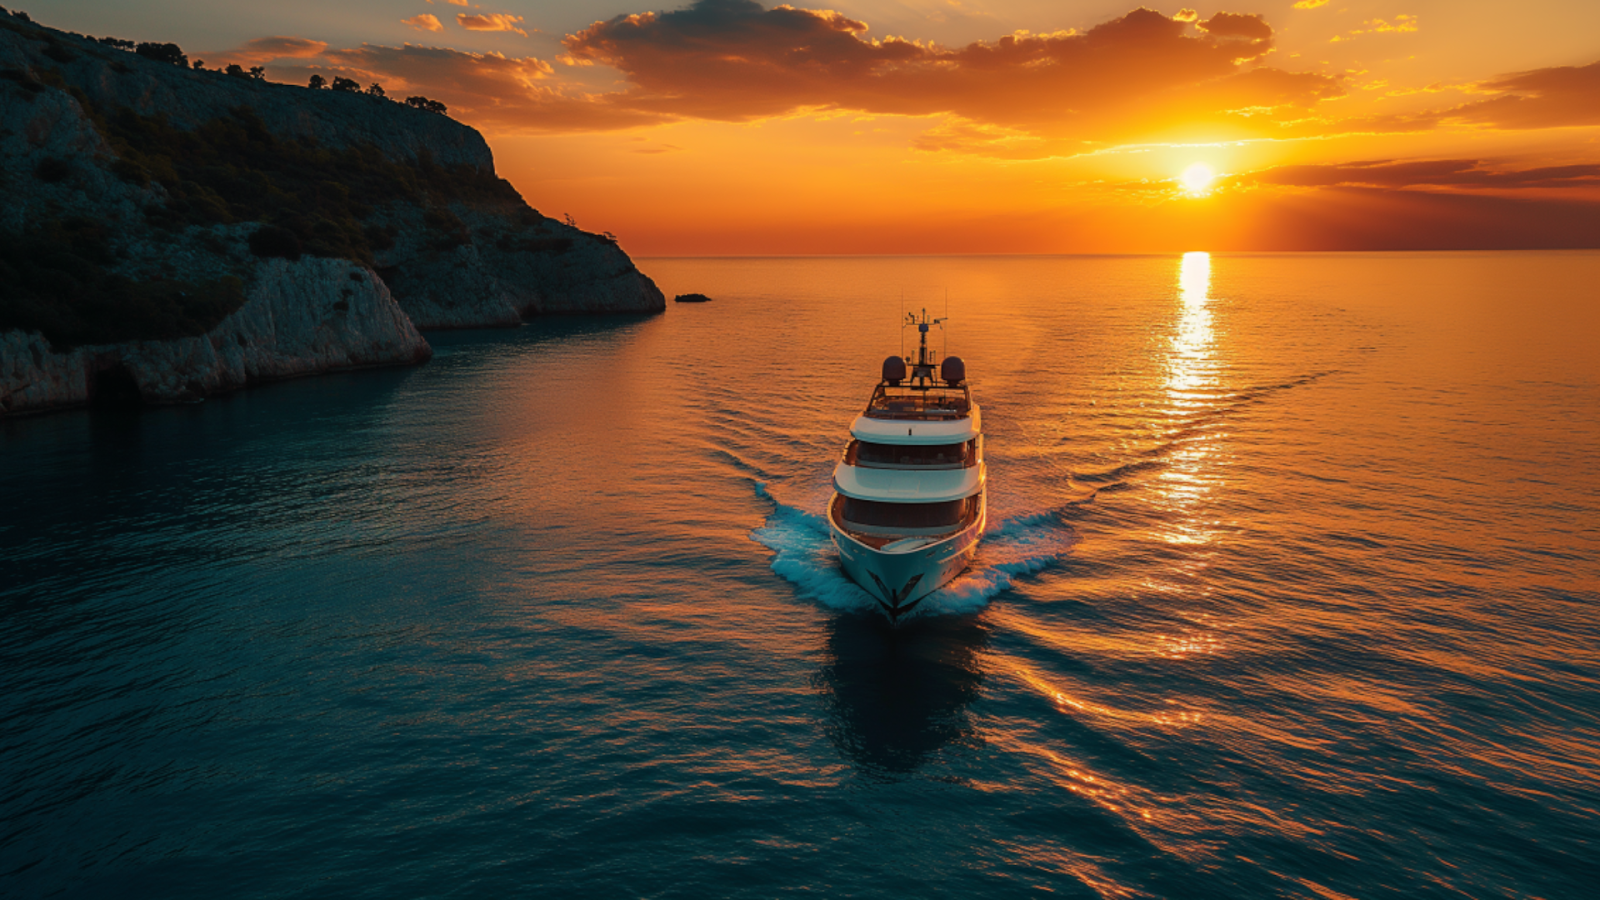 Private yacht sailing at sunset along the Croatian coastline